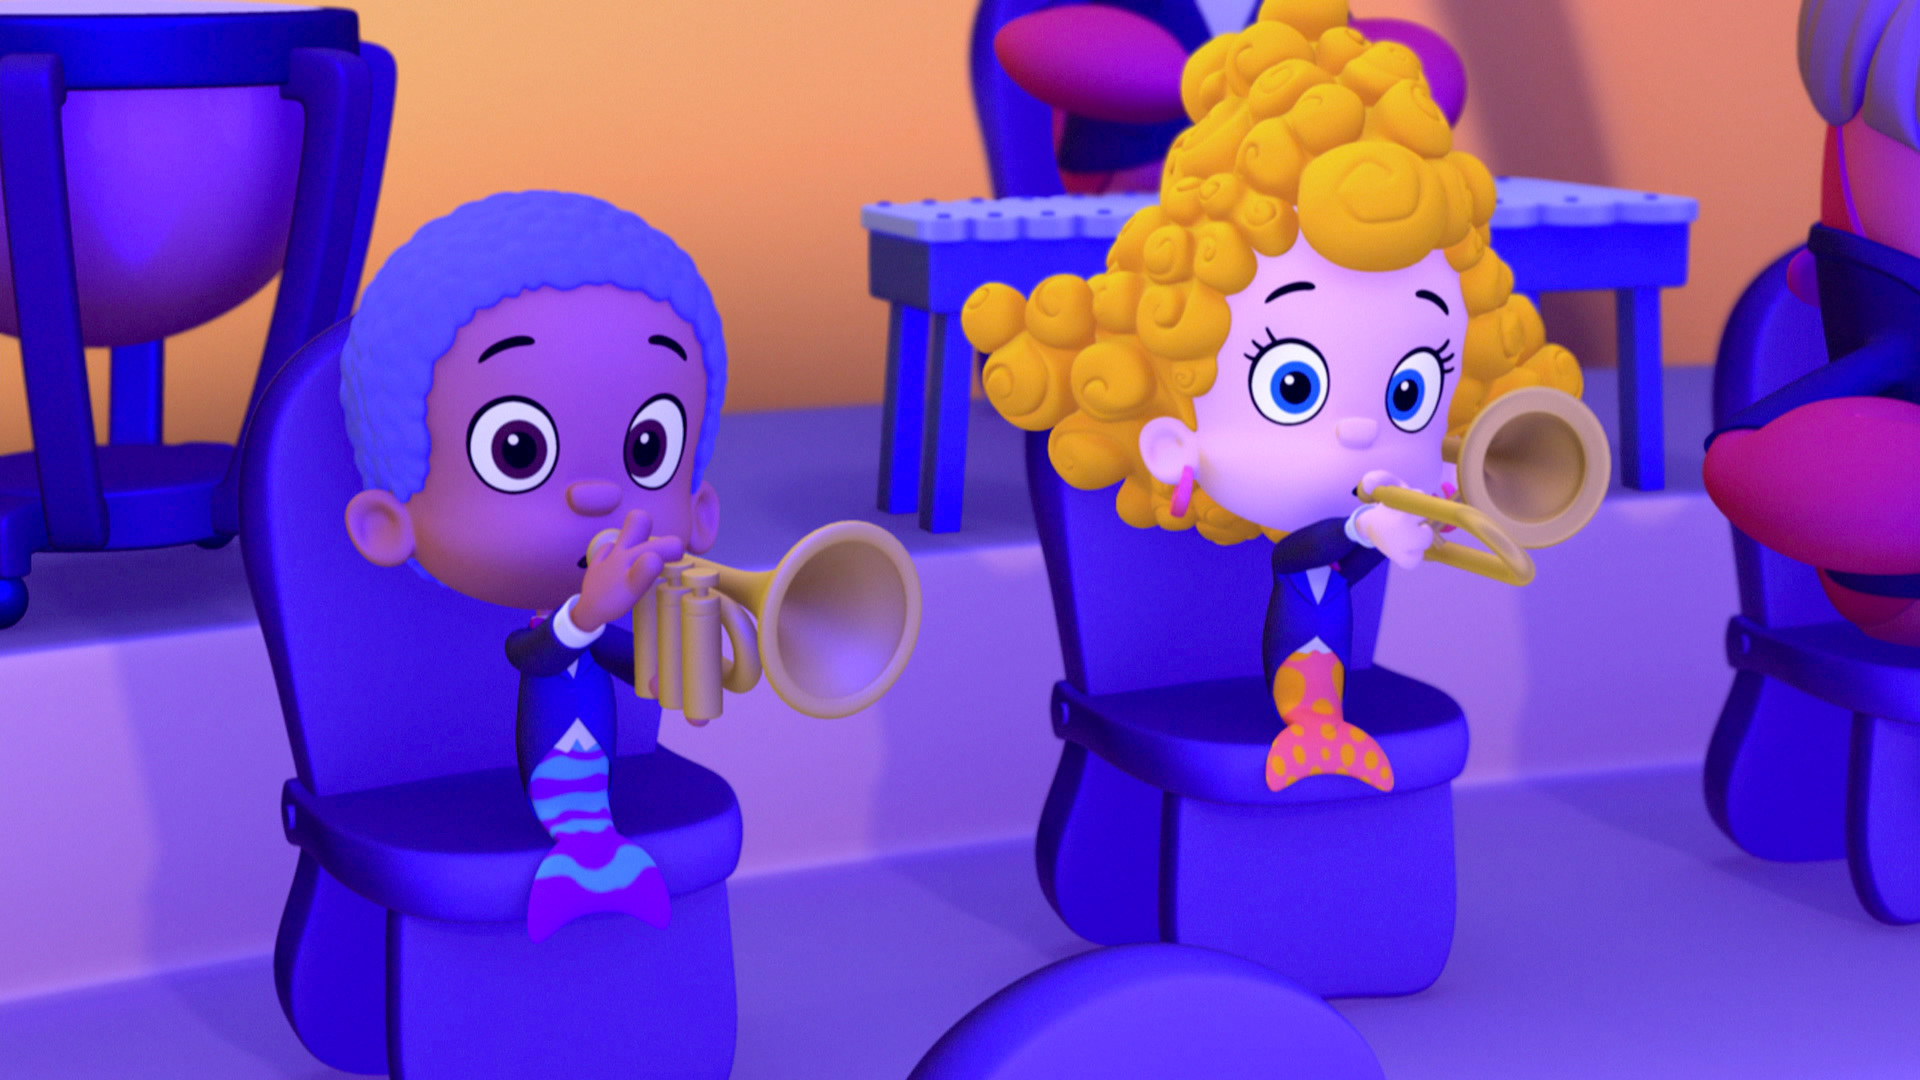 Watch Bubble Guppies Season 3 Episode 13 The Unidentified Flying Orchestra Full Show On Paramount Plus